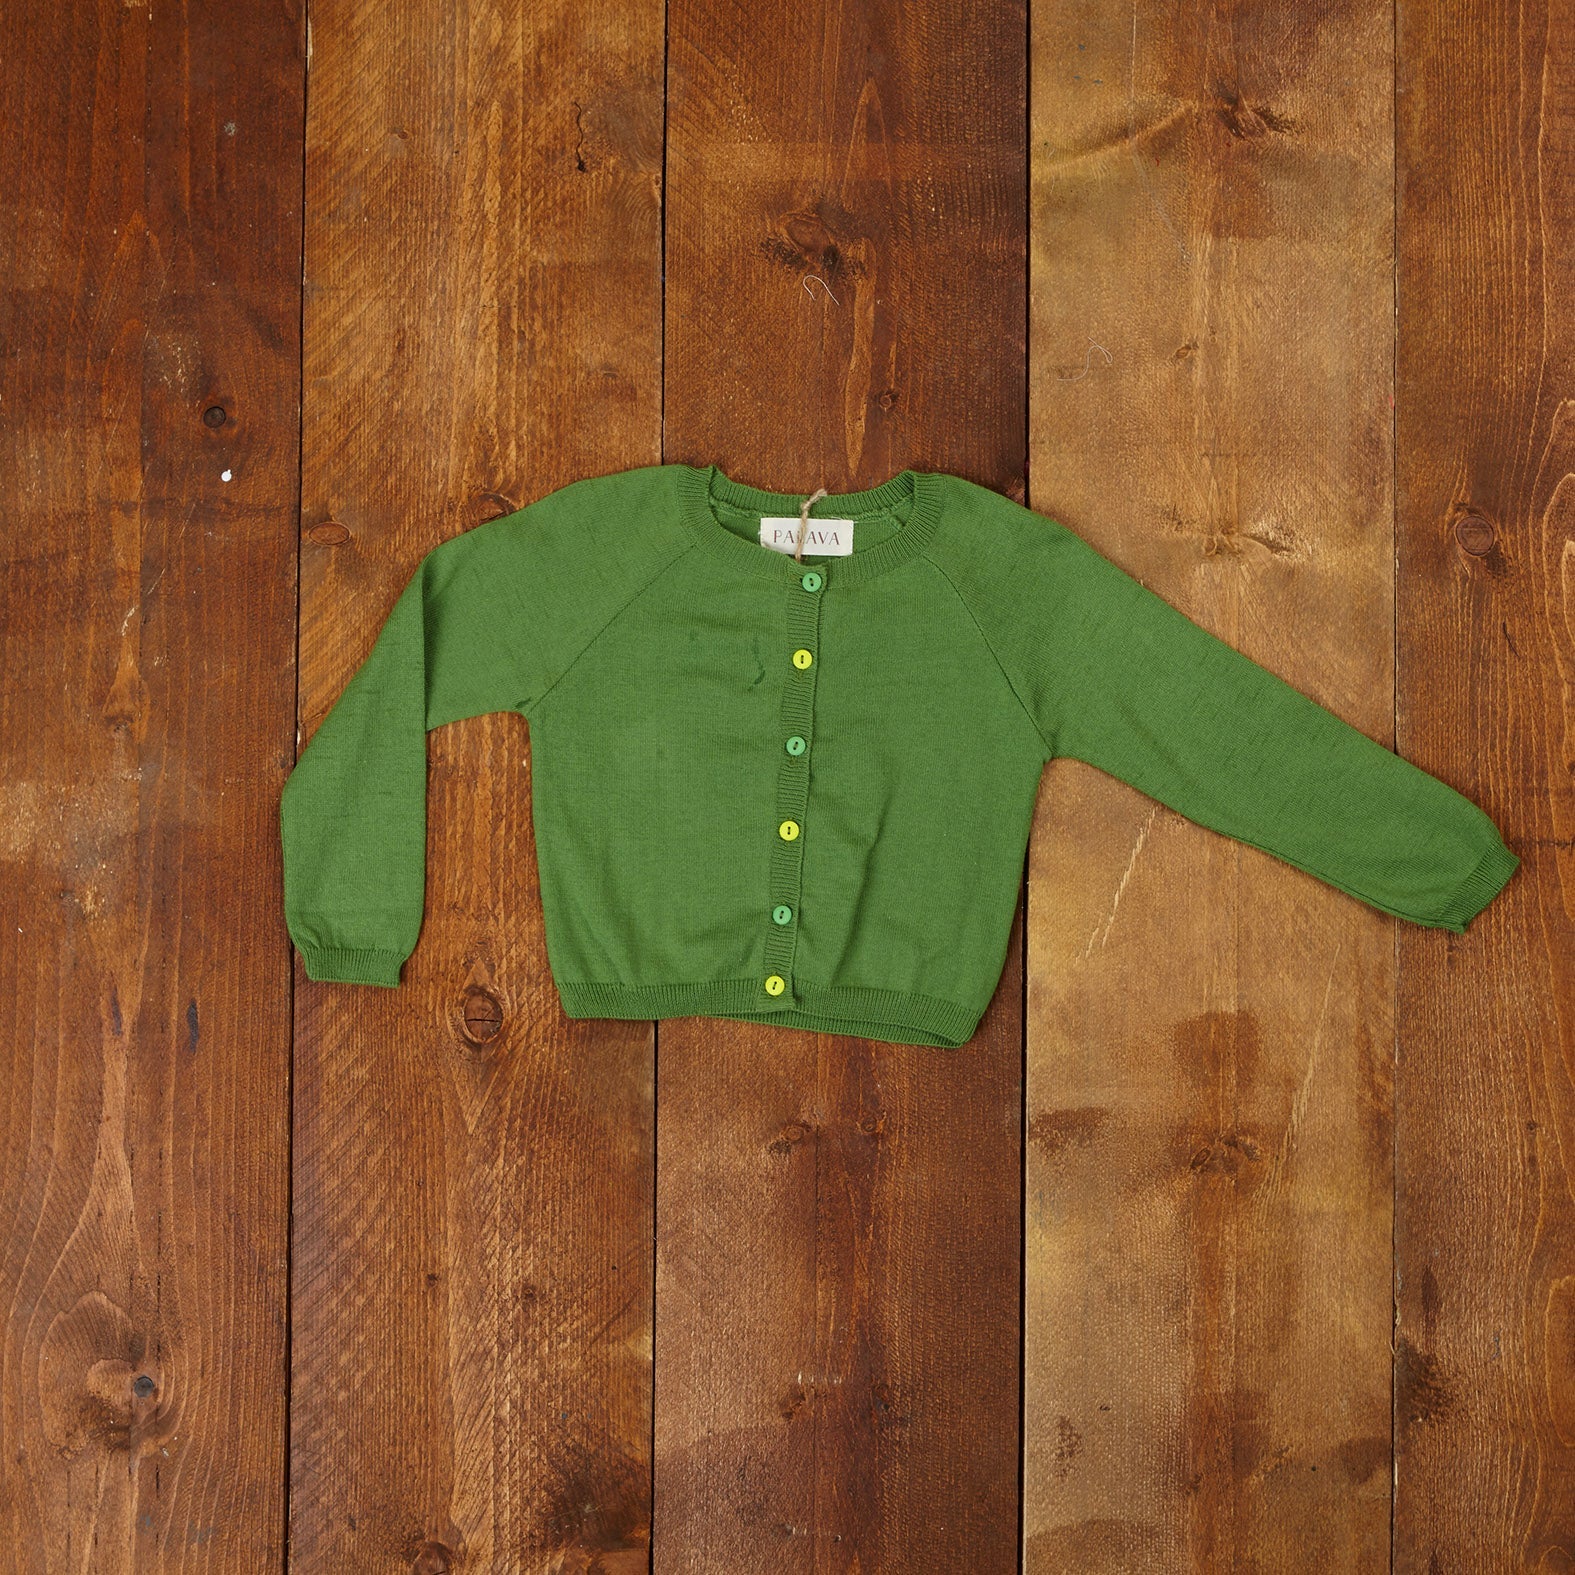 Palava_Cotton_Green_Cardigan_Childrens_Childrenswear_Ethically_Made_Vintage_Style_7561c182-6054-4a4e-8581-581eff23f5f3.jpg